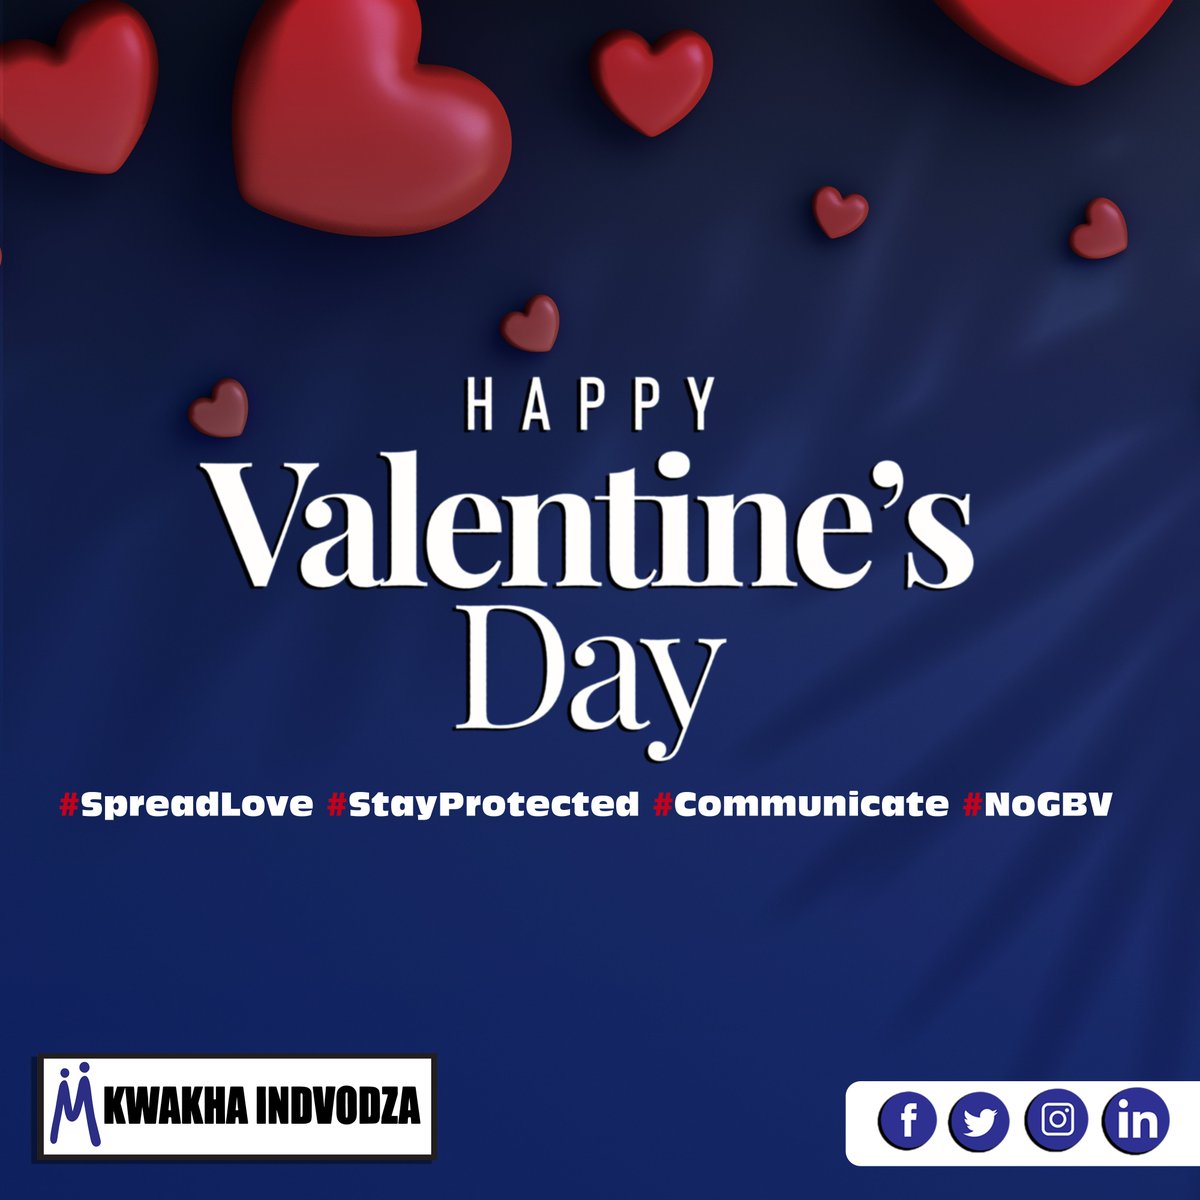 This Valentine's Day please prioritize your mental health. Love should not take away from you but should uplift and build you.📷📷📷 #happyvalentinesday #loveisintheair #lovers #Uthando #KwakhaIndvodza